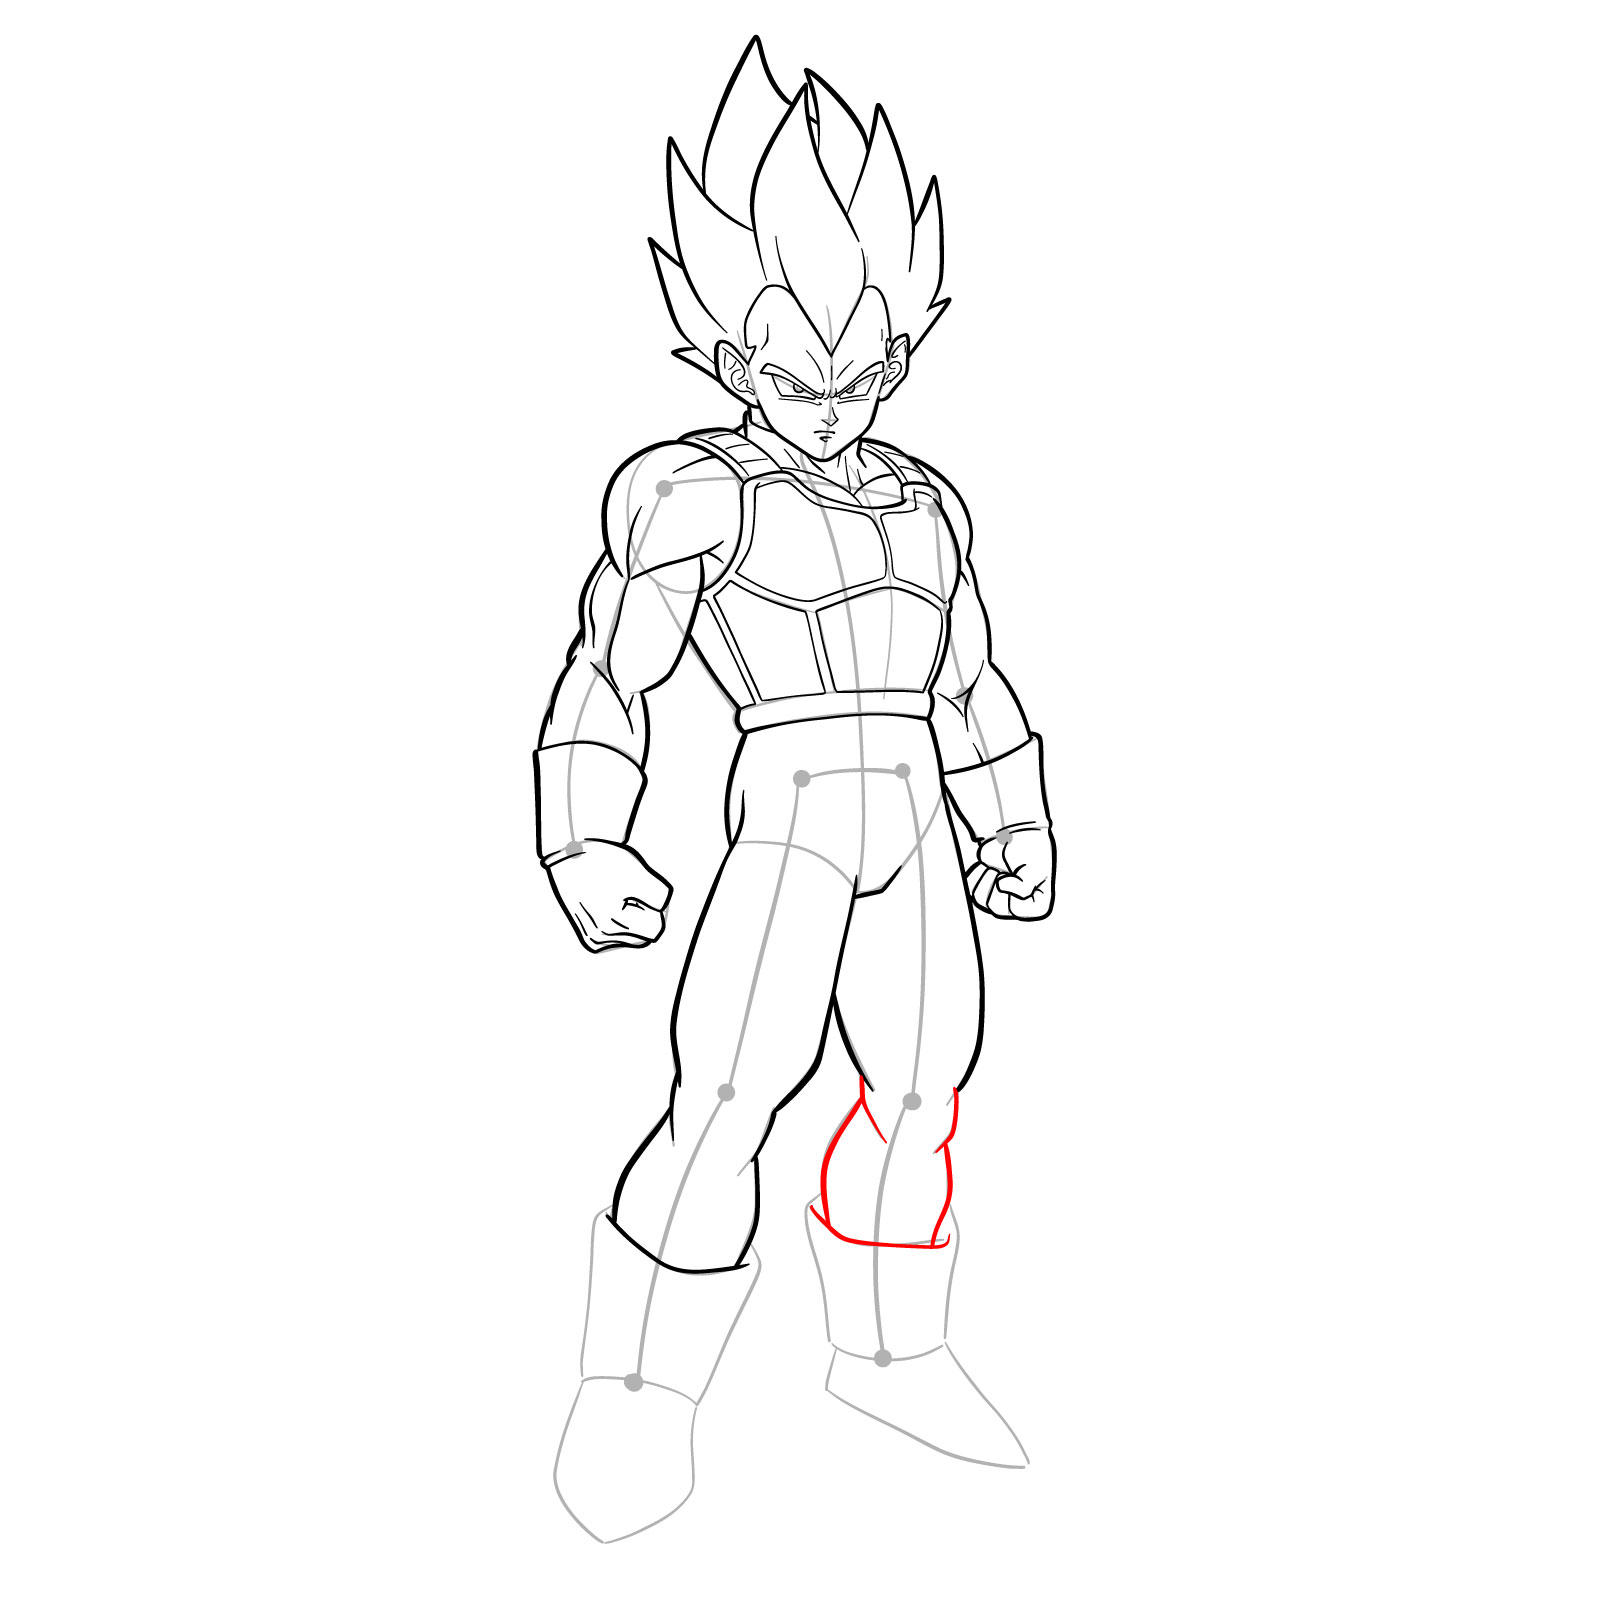 How to draw Vegeta in SSGSS - step 36